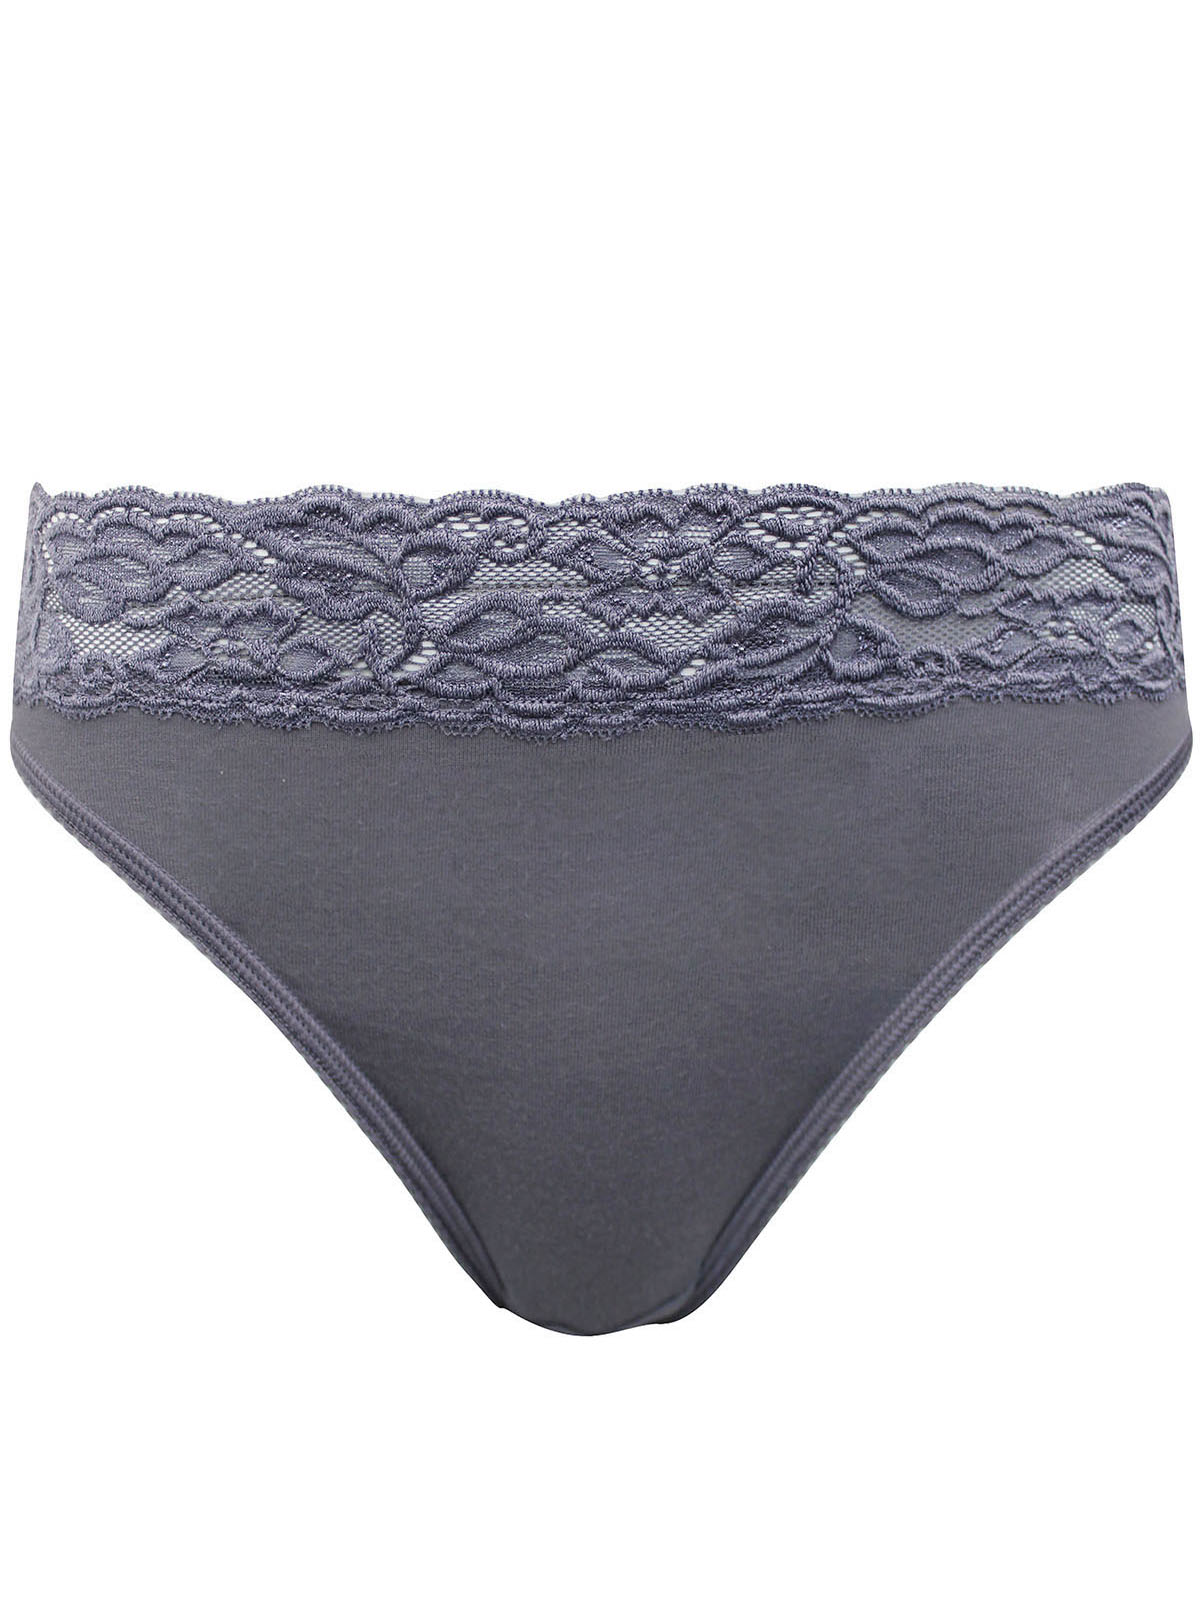 Lane Bryant Cotton Full Brief Panty With Lace-Trimmed Back / Aries Star